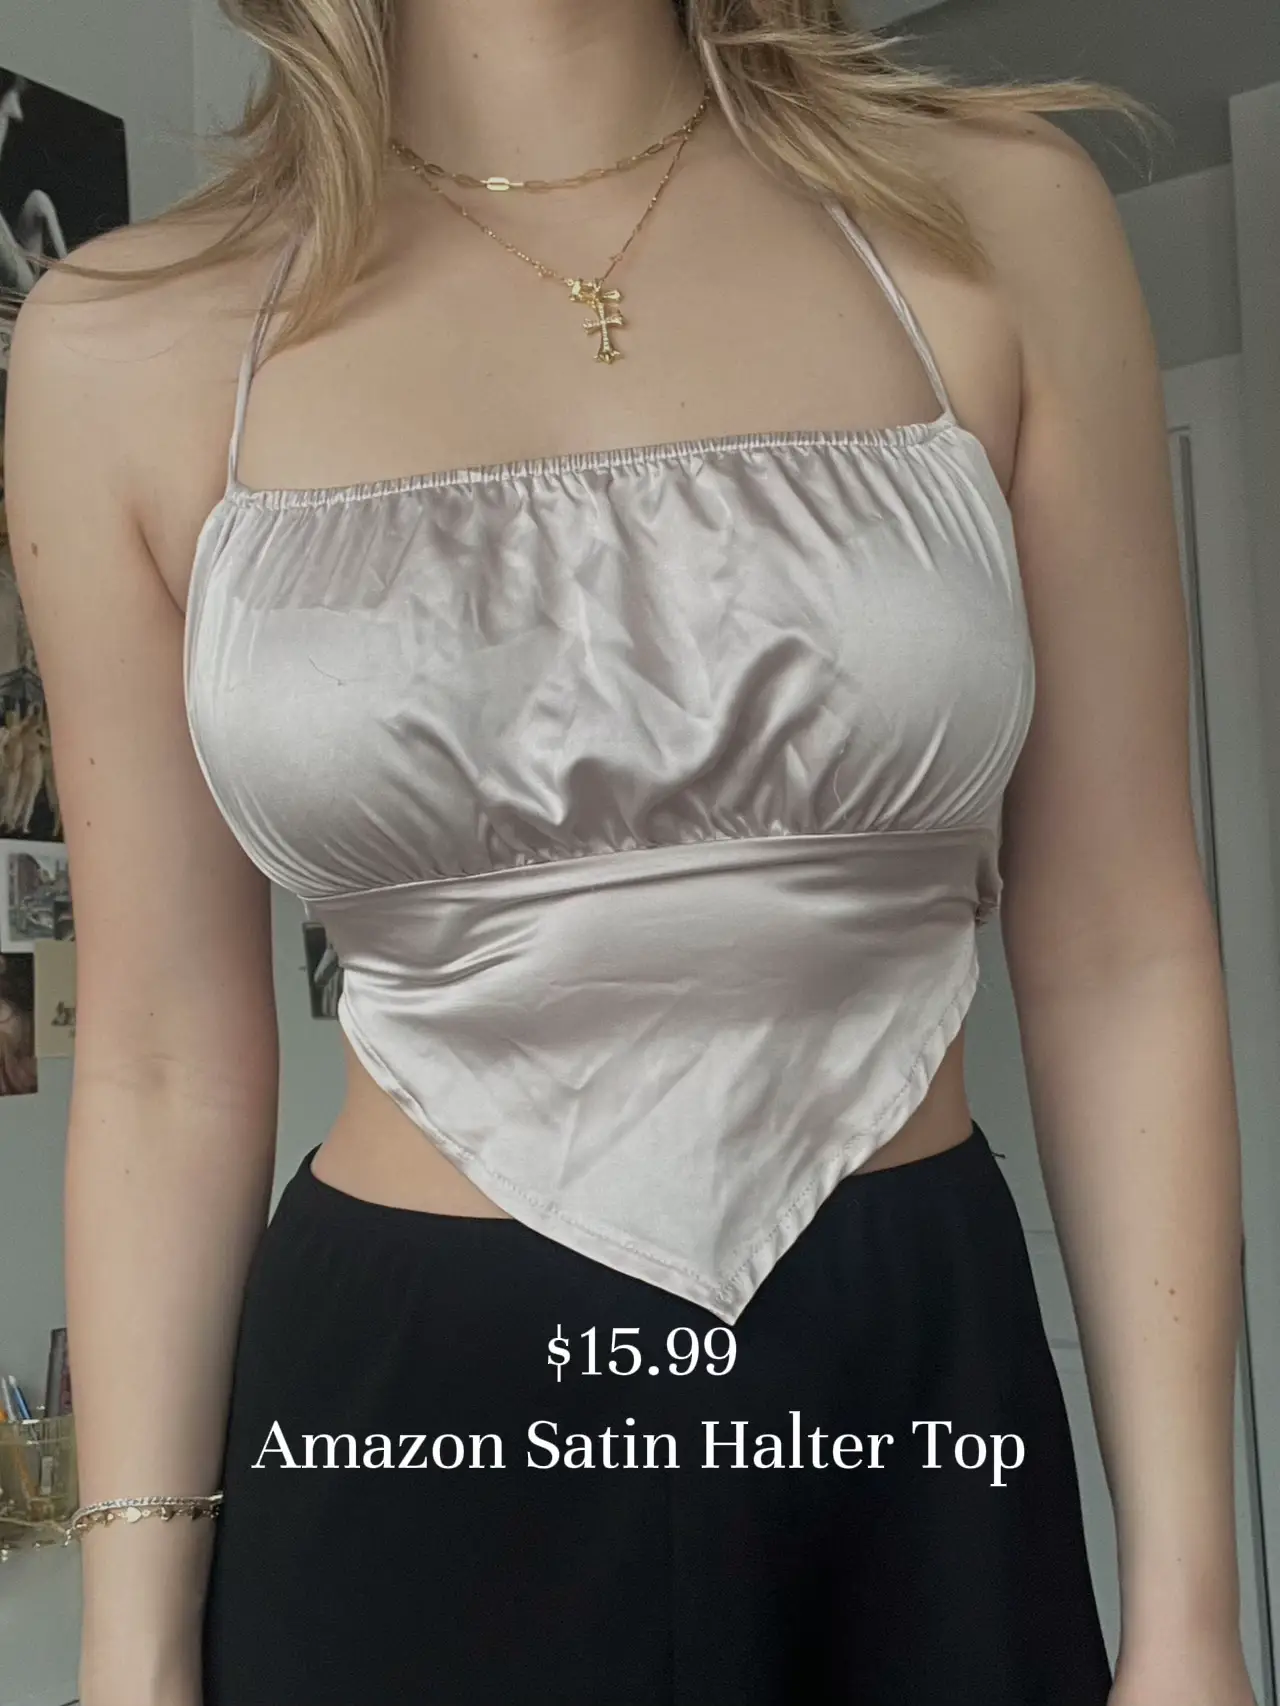 Oct. 2019, New Aliexpress E cup boobs with arms. Held in (w…